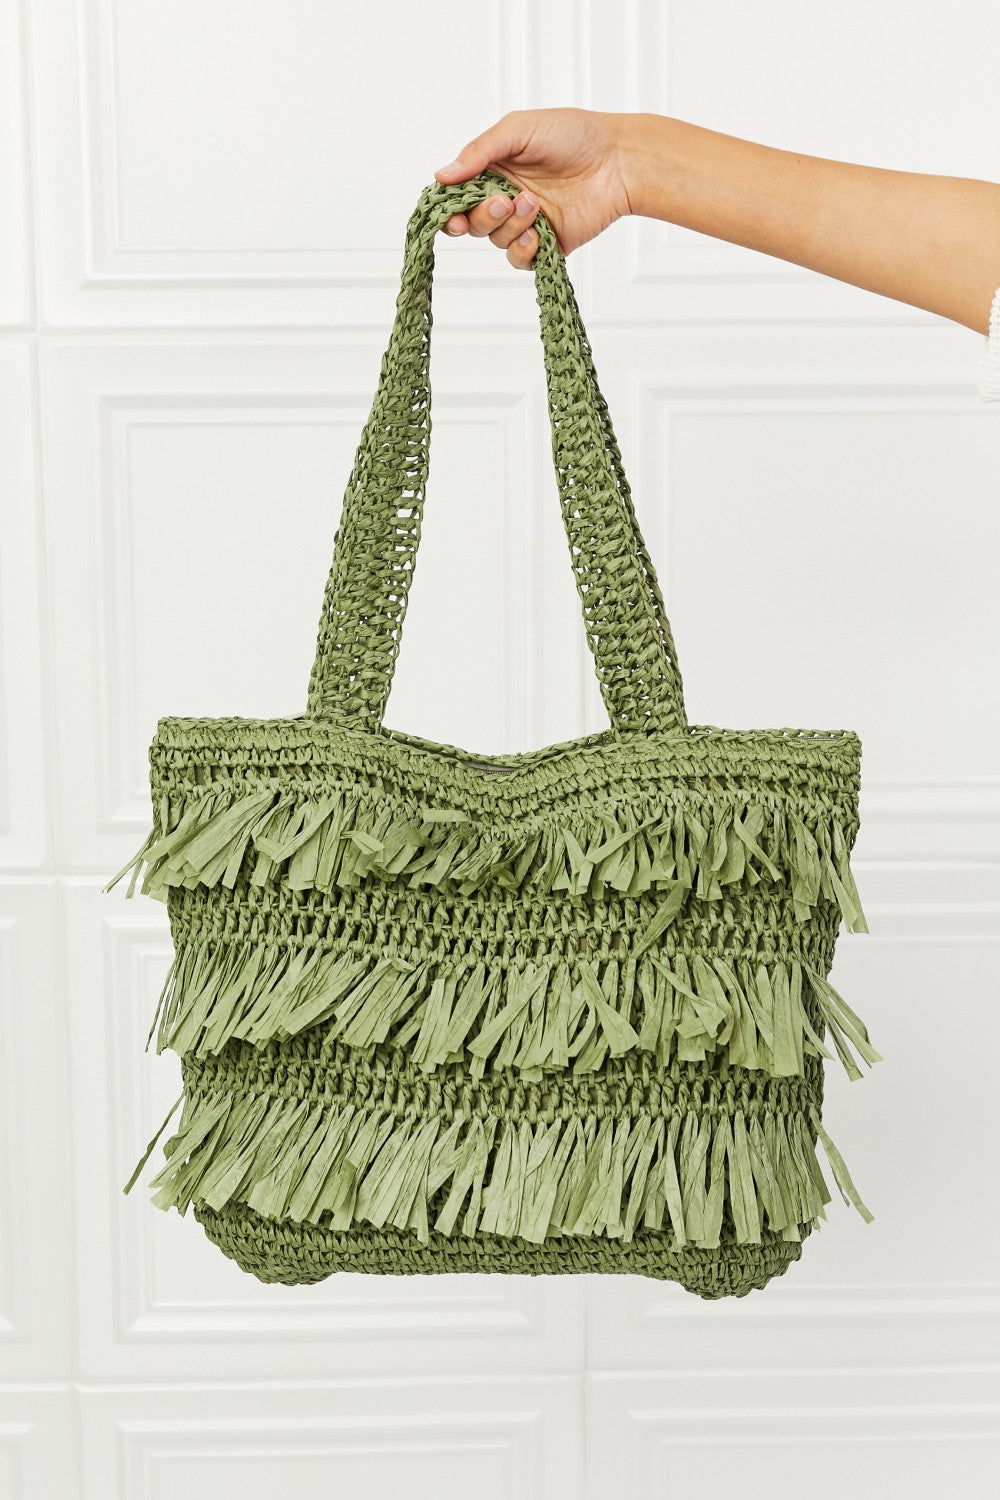 Fame The Last Straw Fringe Straw Tote Bag - BEAUTY COSMOTICS SHOP